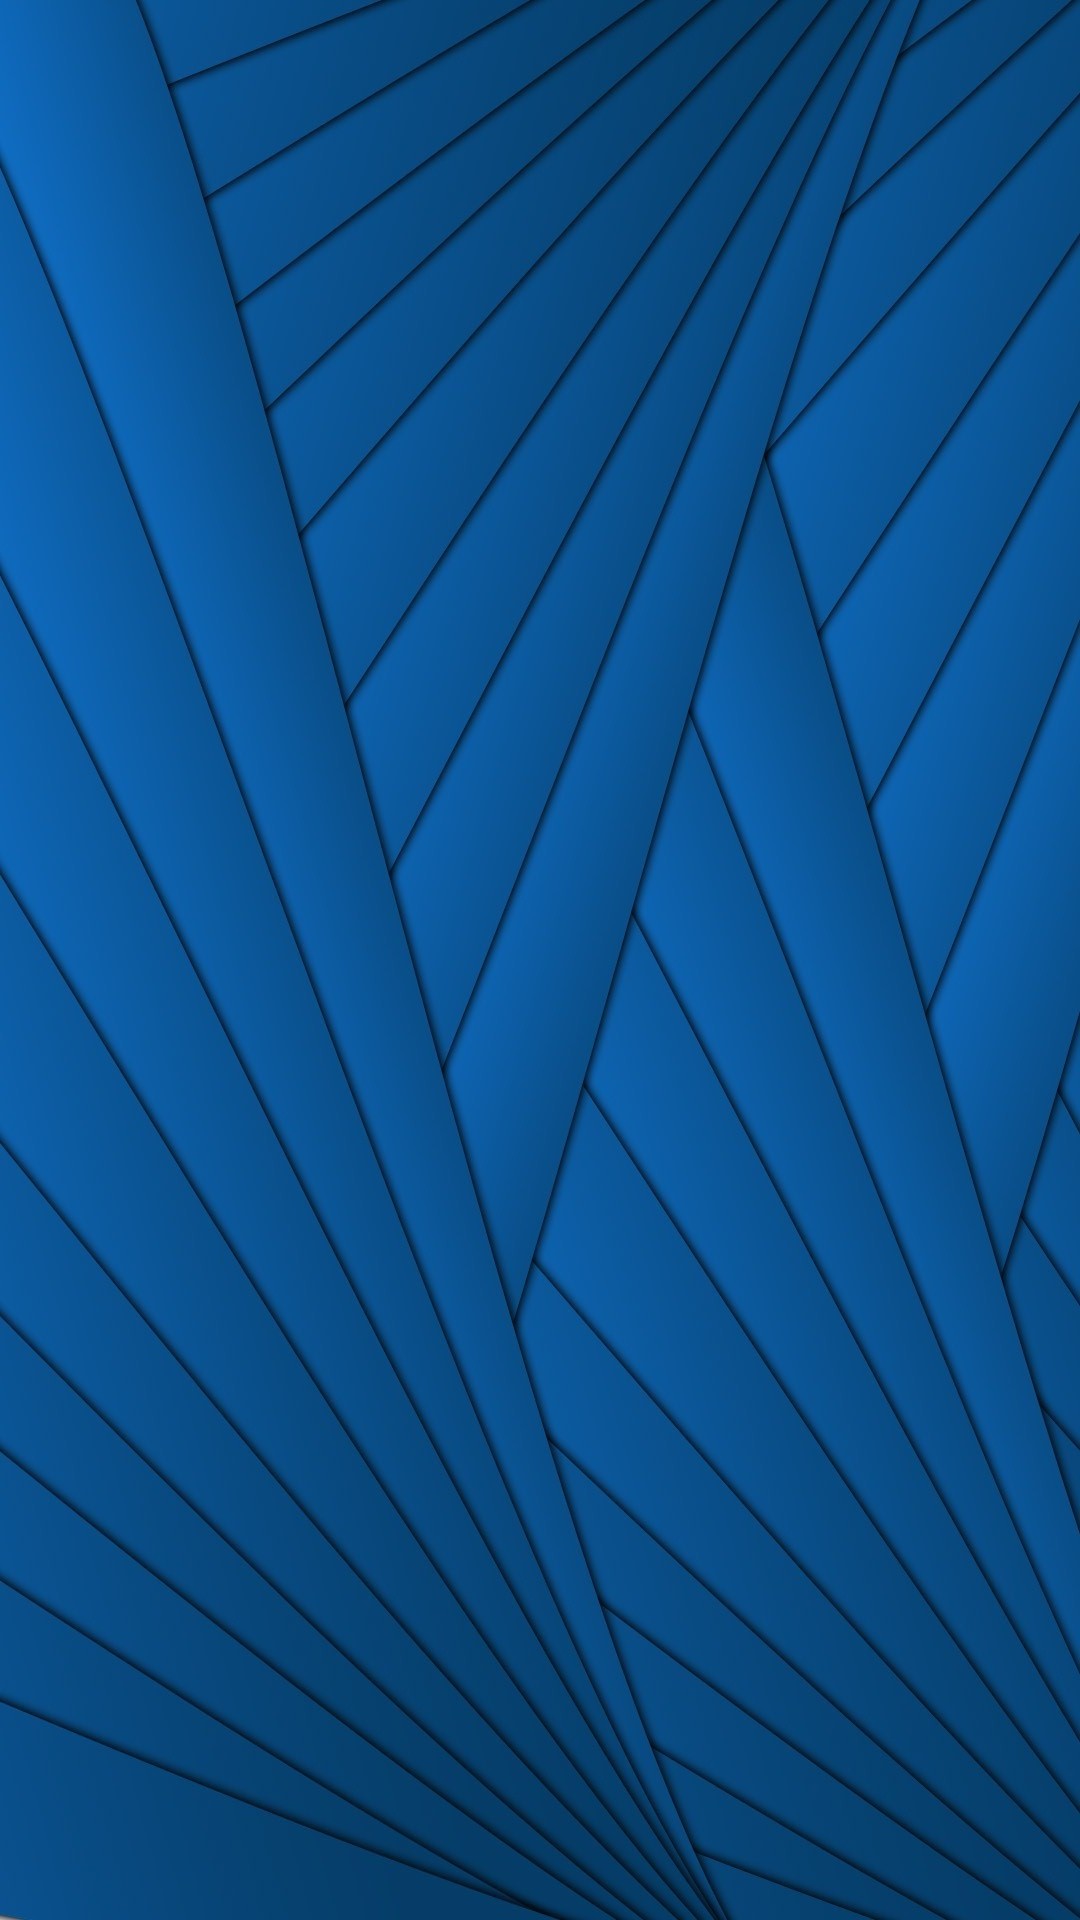 Blue Abstract iPhone Wallpaper resolution 1080x1920